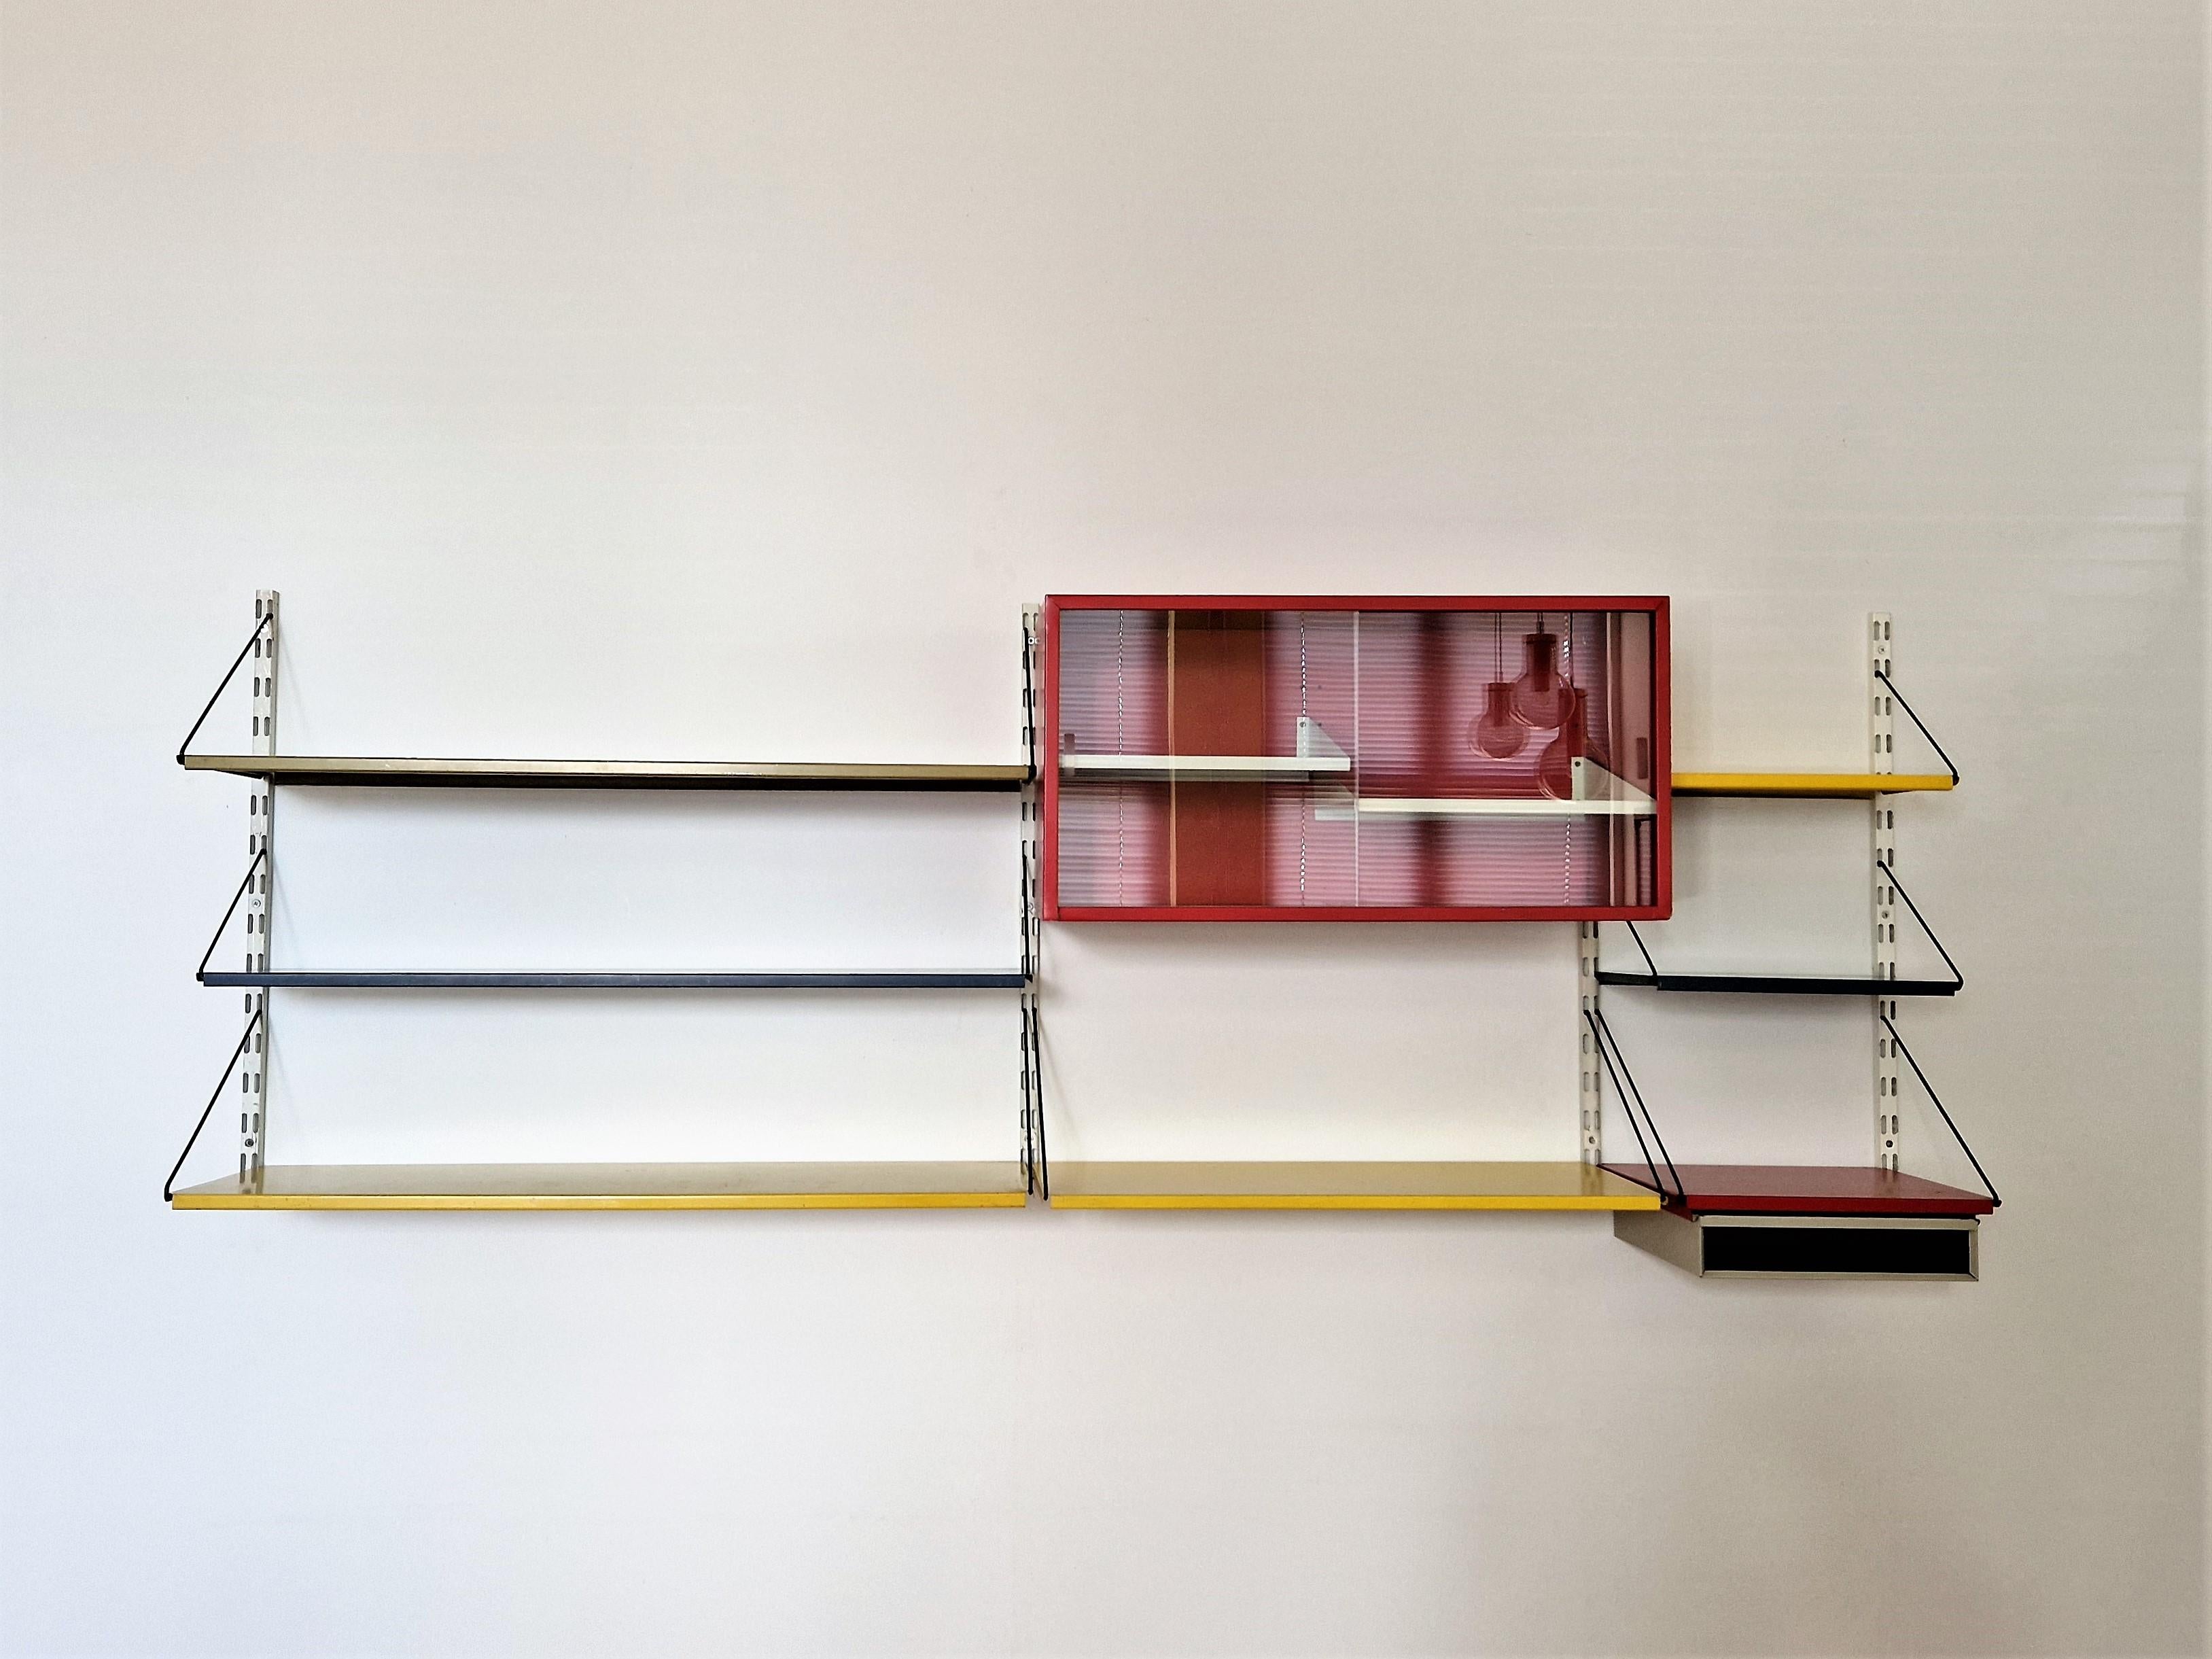 Metal Wall Unit in Red, Yellow and Blue by Tjerk Rijenga for Pilastro, 1950's For Sale 6